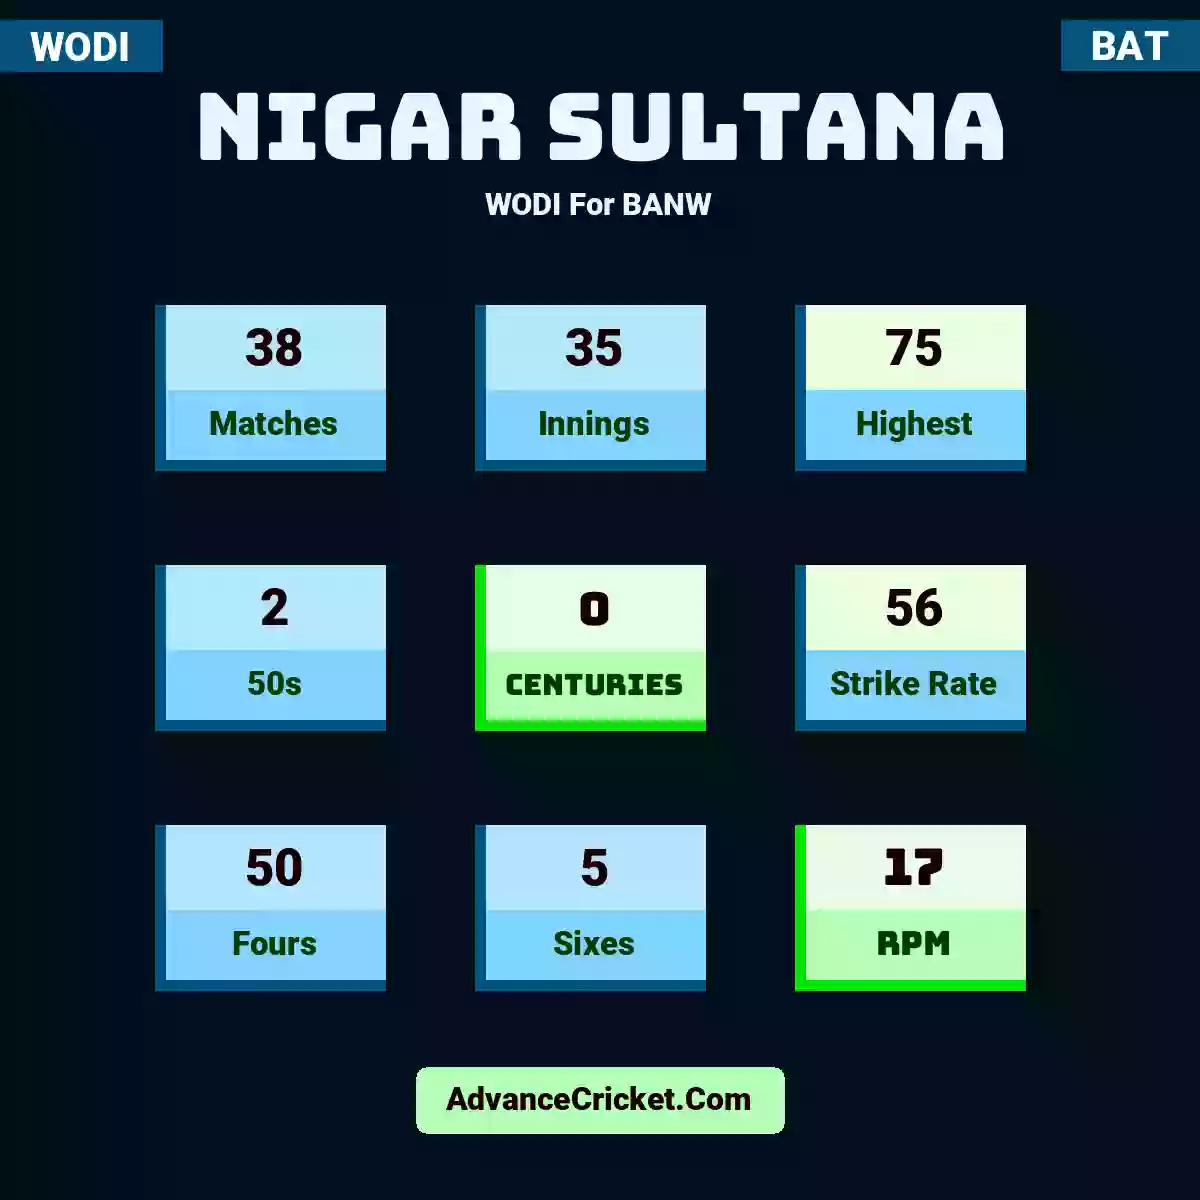 Nigar Sultana WODI  For BANW, Nigar Sultana played 38 matches, scored 75 runs as highest, 2 half-centuries, and 0 centuries, with a strike rate of 56. N.Sultana hit 50 fours and 5 sixes, with an RPM of 17.